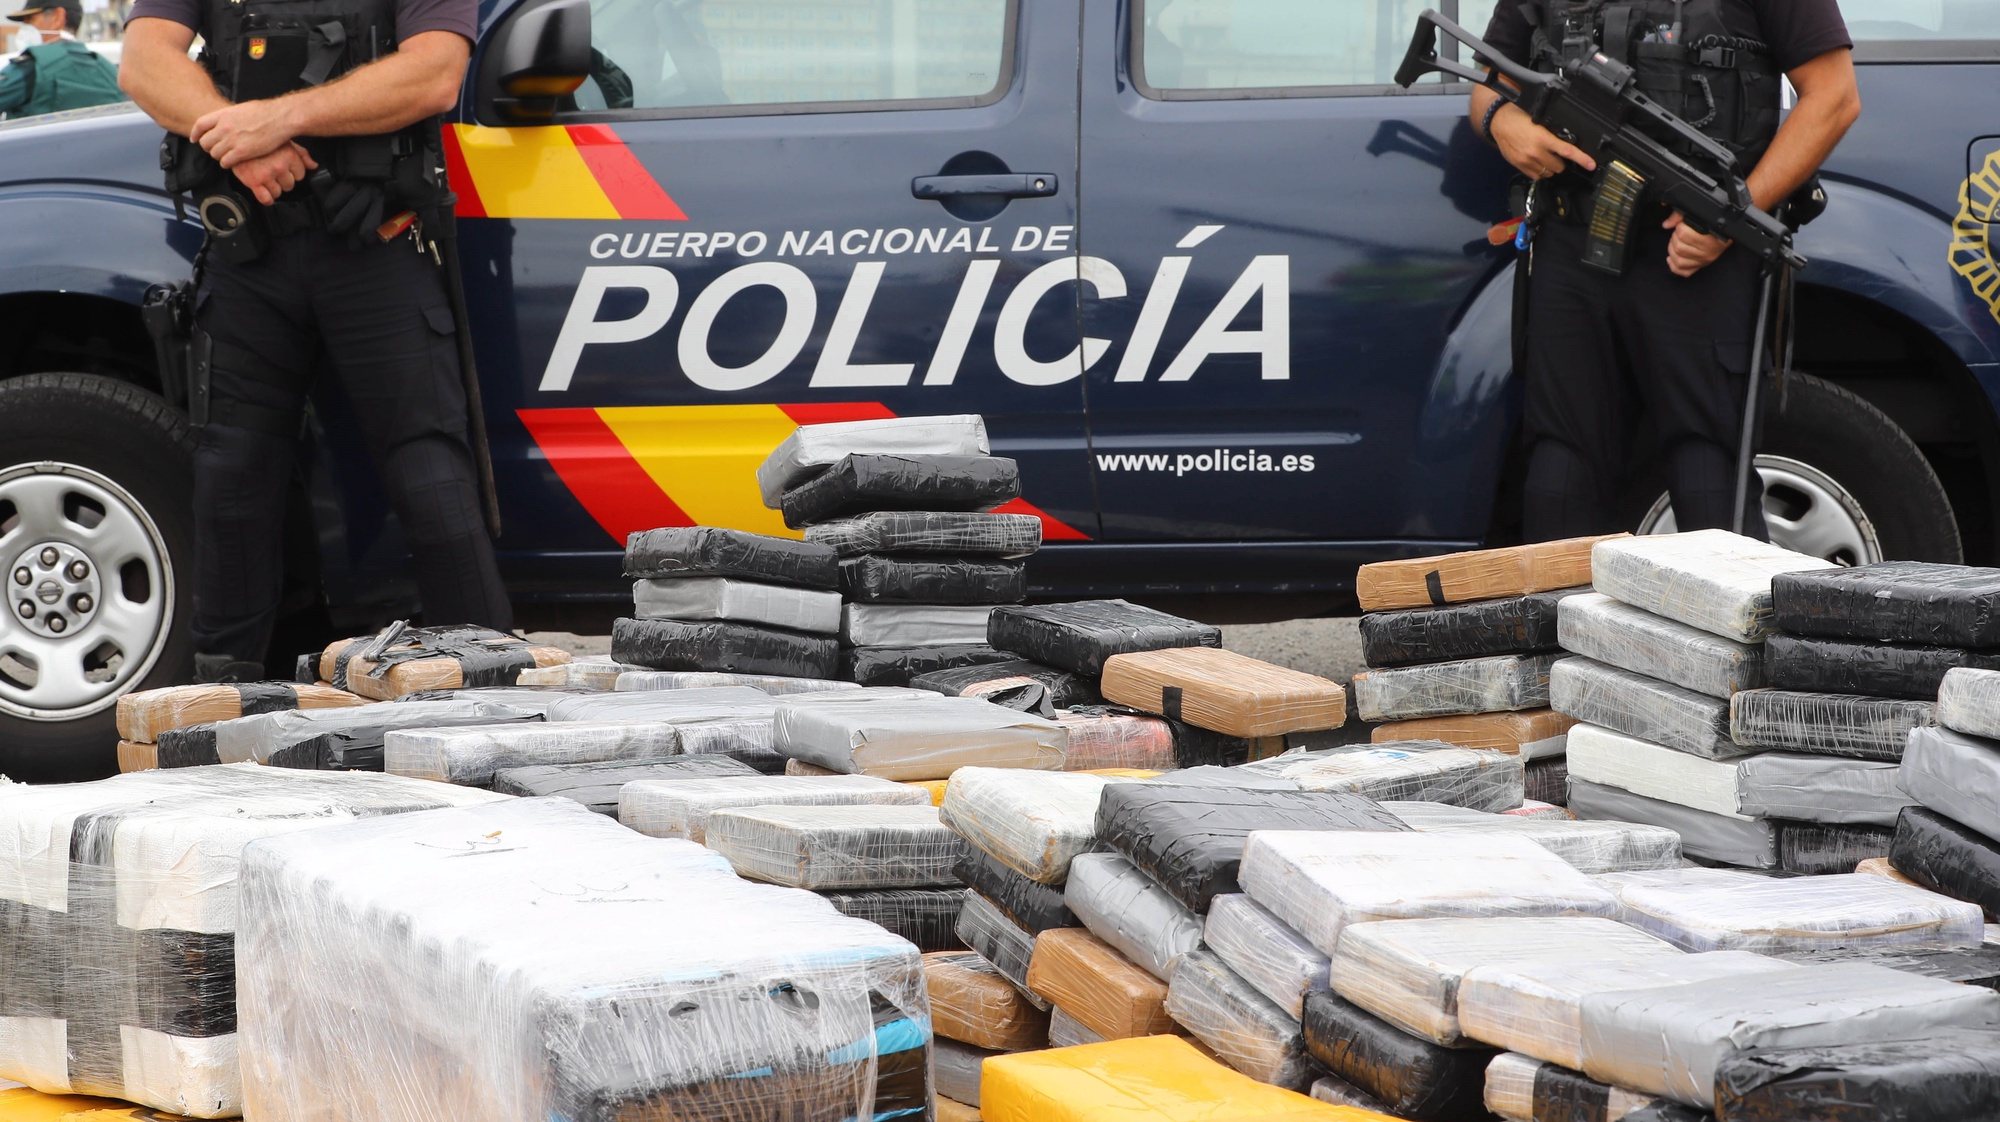 epa08583261 Spanish National Police shows some of the 1,8 tons of cocaine, seized in an operation where 12 people have been detained at the dock of Las Palmas de Gran Canaria, Canary Islands, Spain on 04 August 2020.  EPA/ELVIRA URQUIJO A.